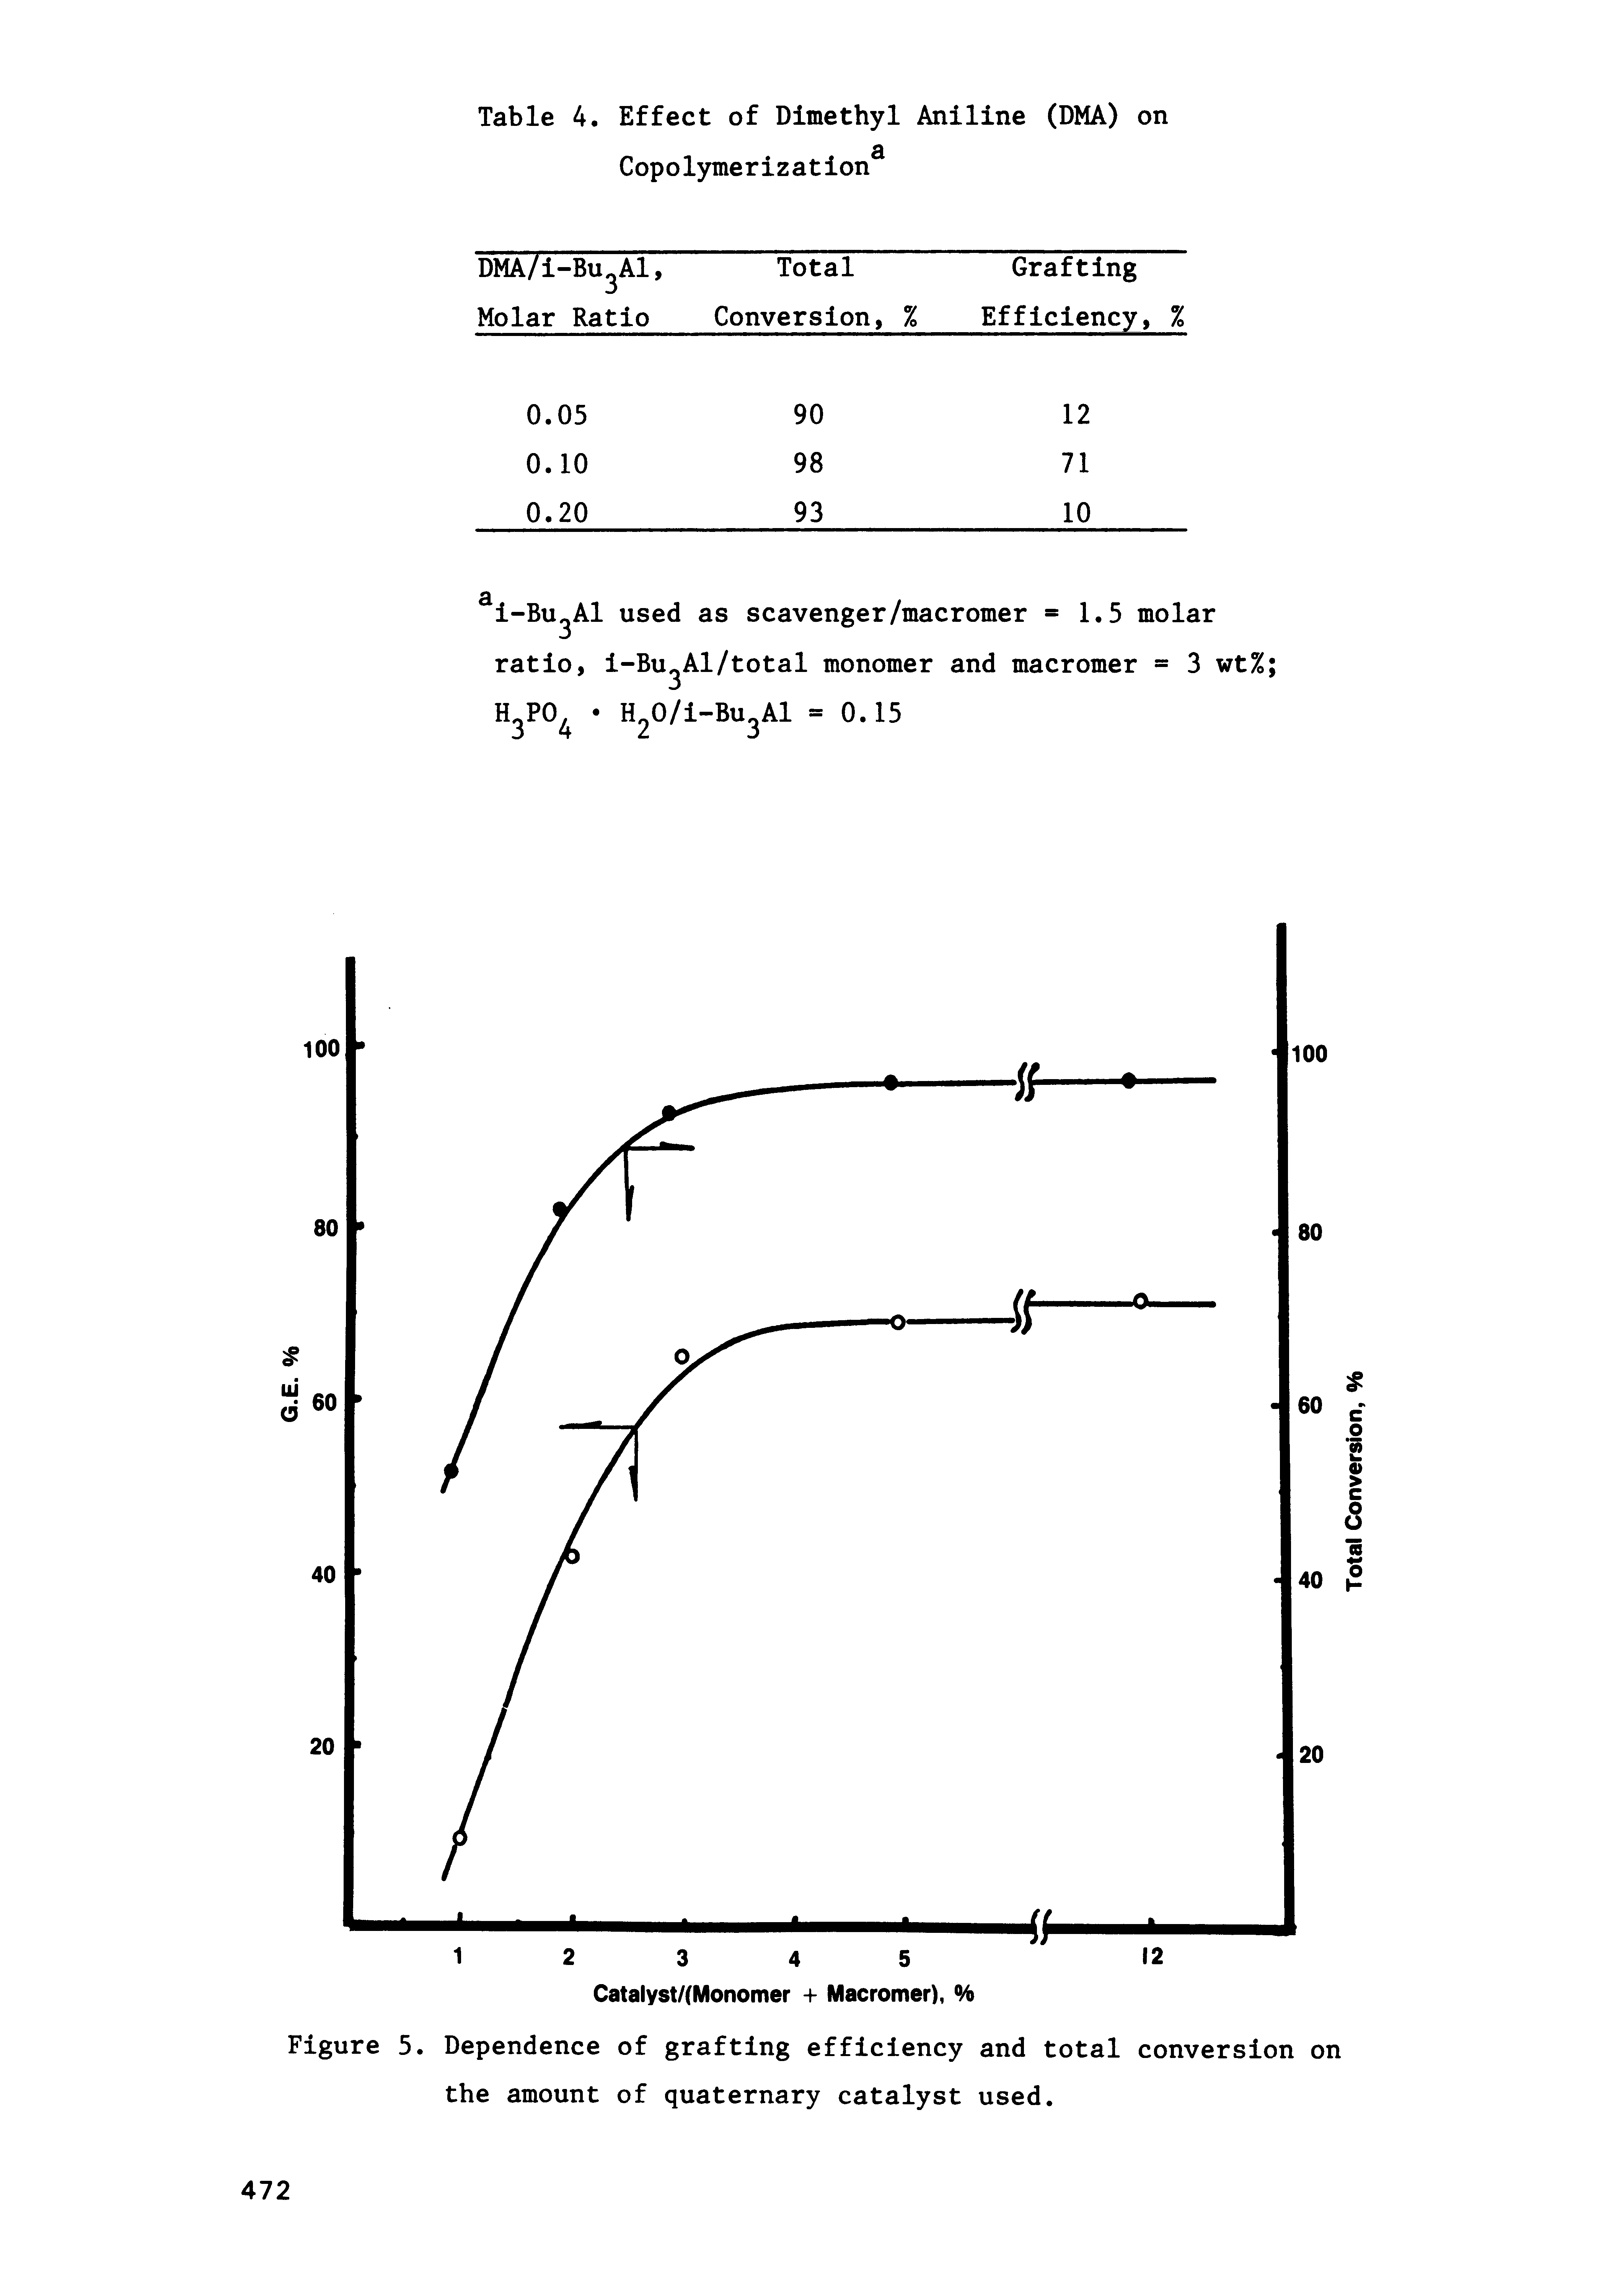 Figure 5. Dependence of grafting efficiency and total conversion on the amount of quaternary catalyst used.